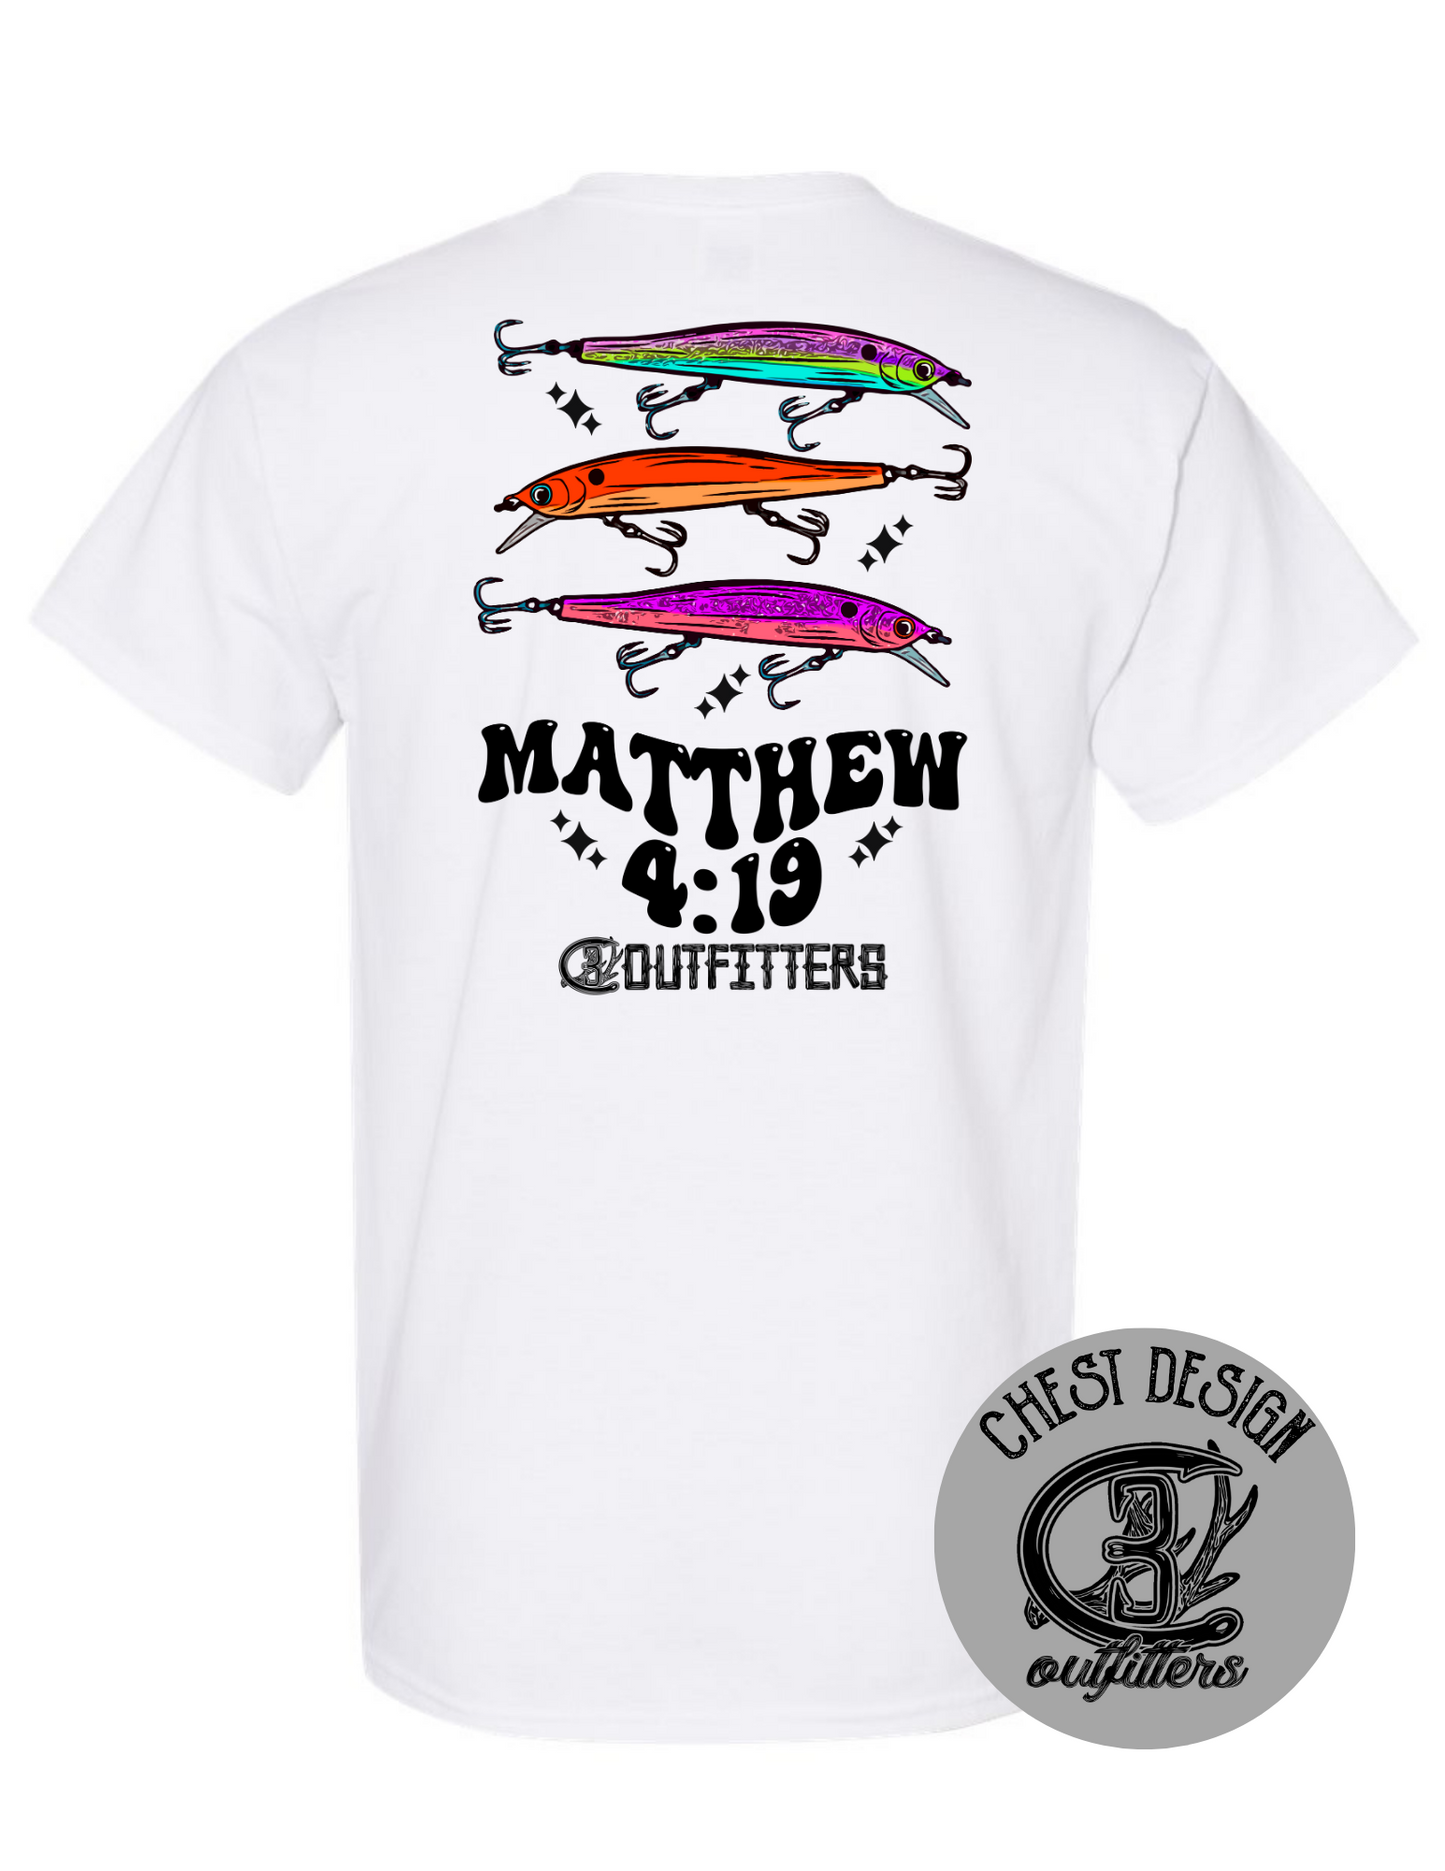 Matthew 4:19 Tee – C3 Outfitters